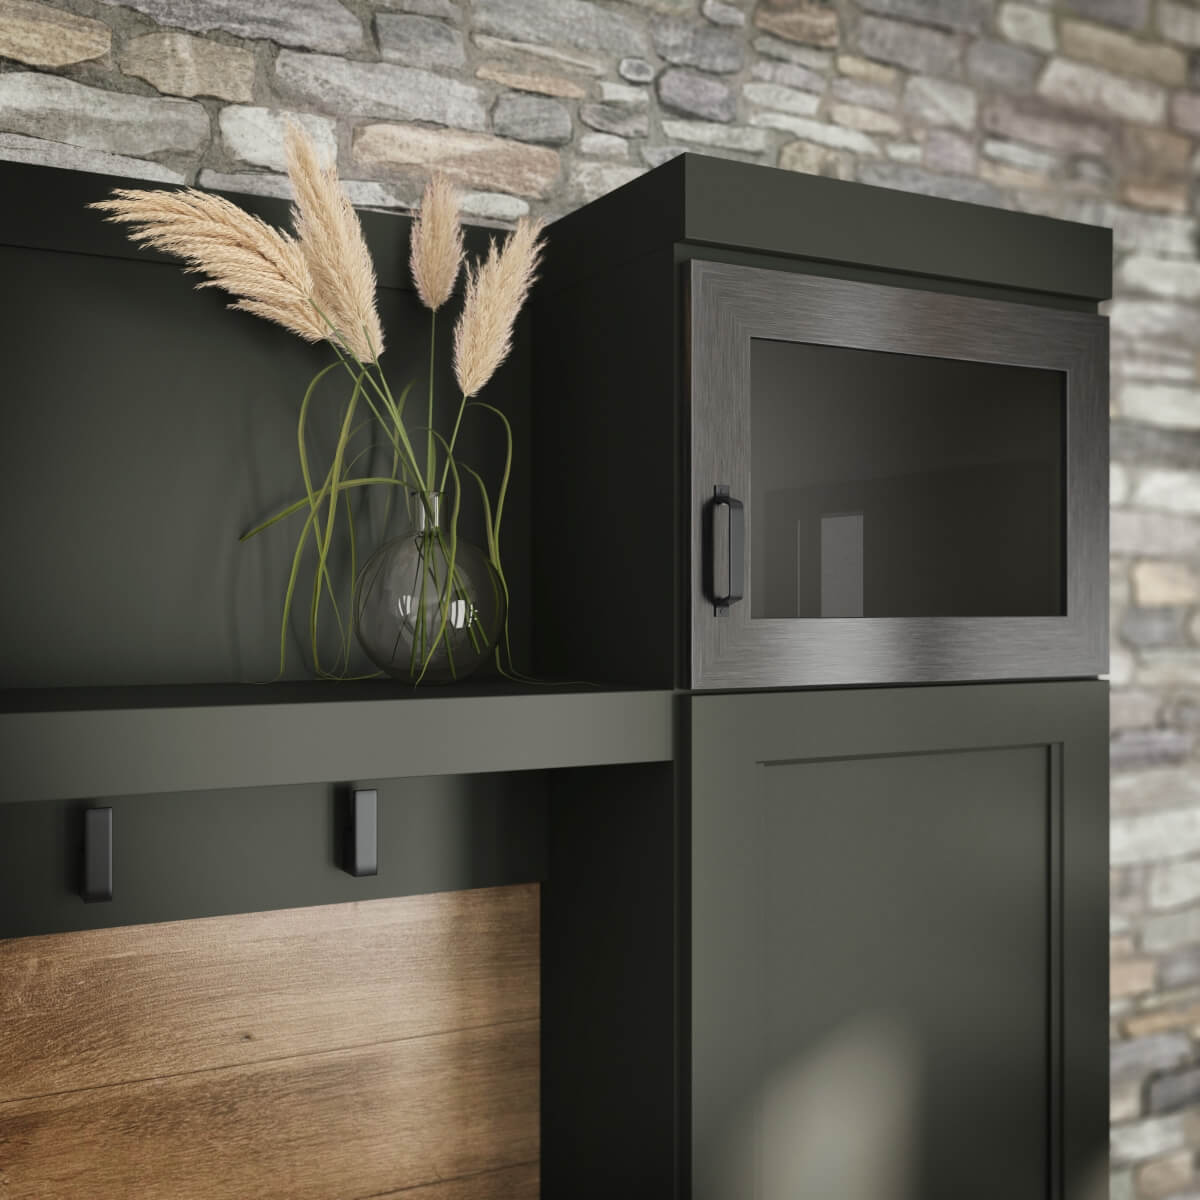 Entryway with mudroom lockers and dark green painted cabinetry with a metal accent cabinet door and wood plank details. Dura Supreme Cabinetry with a trendy painted finish, Rock Bottom green.